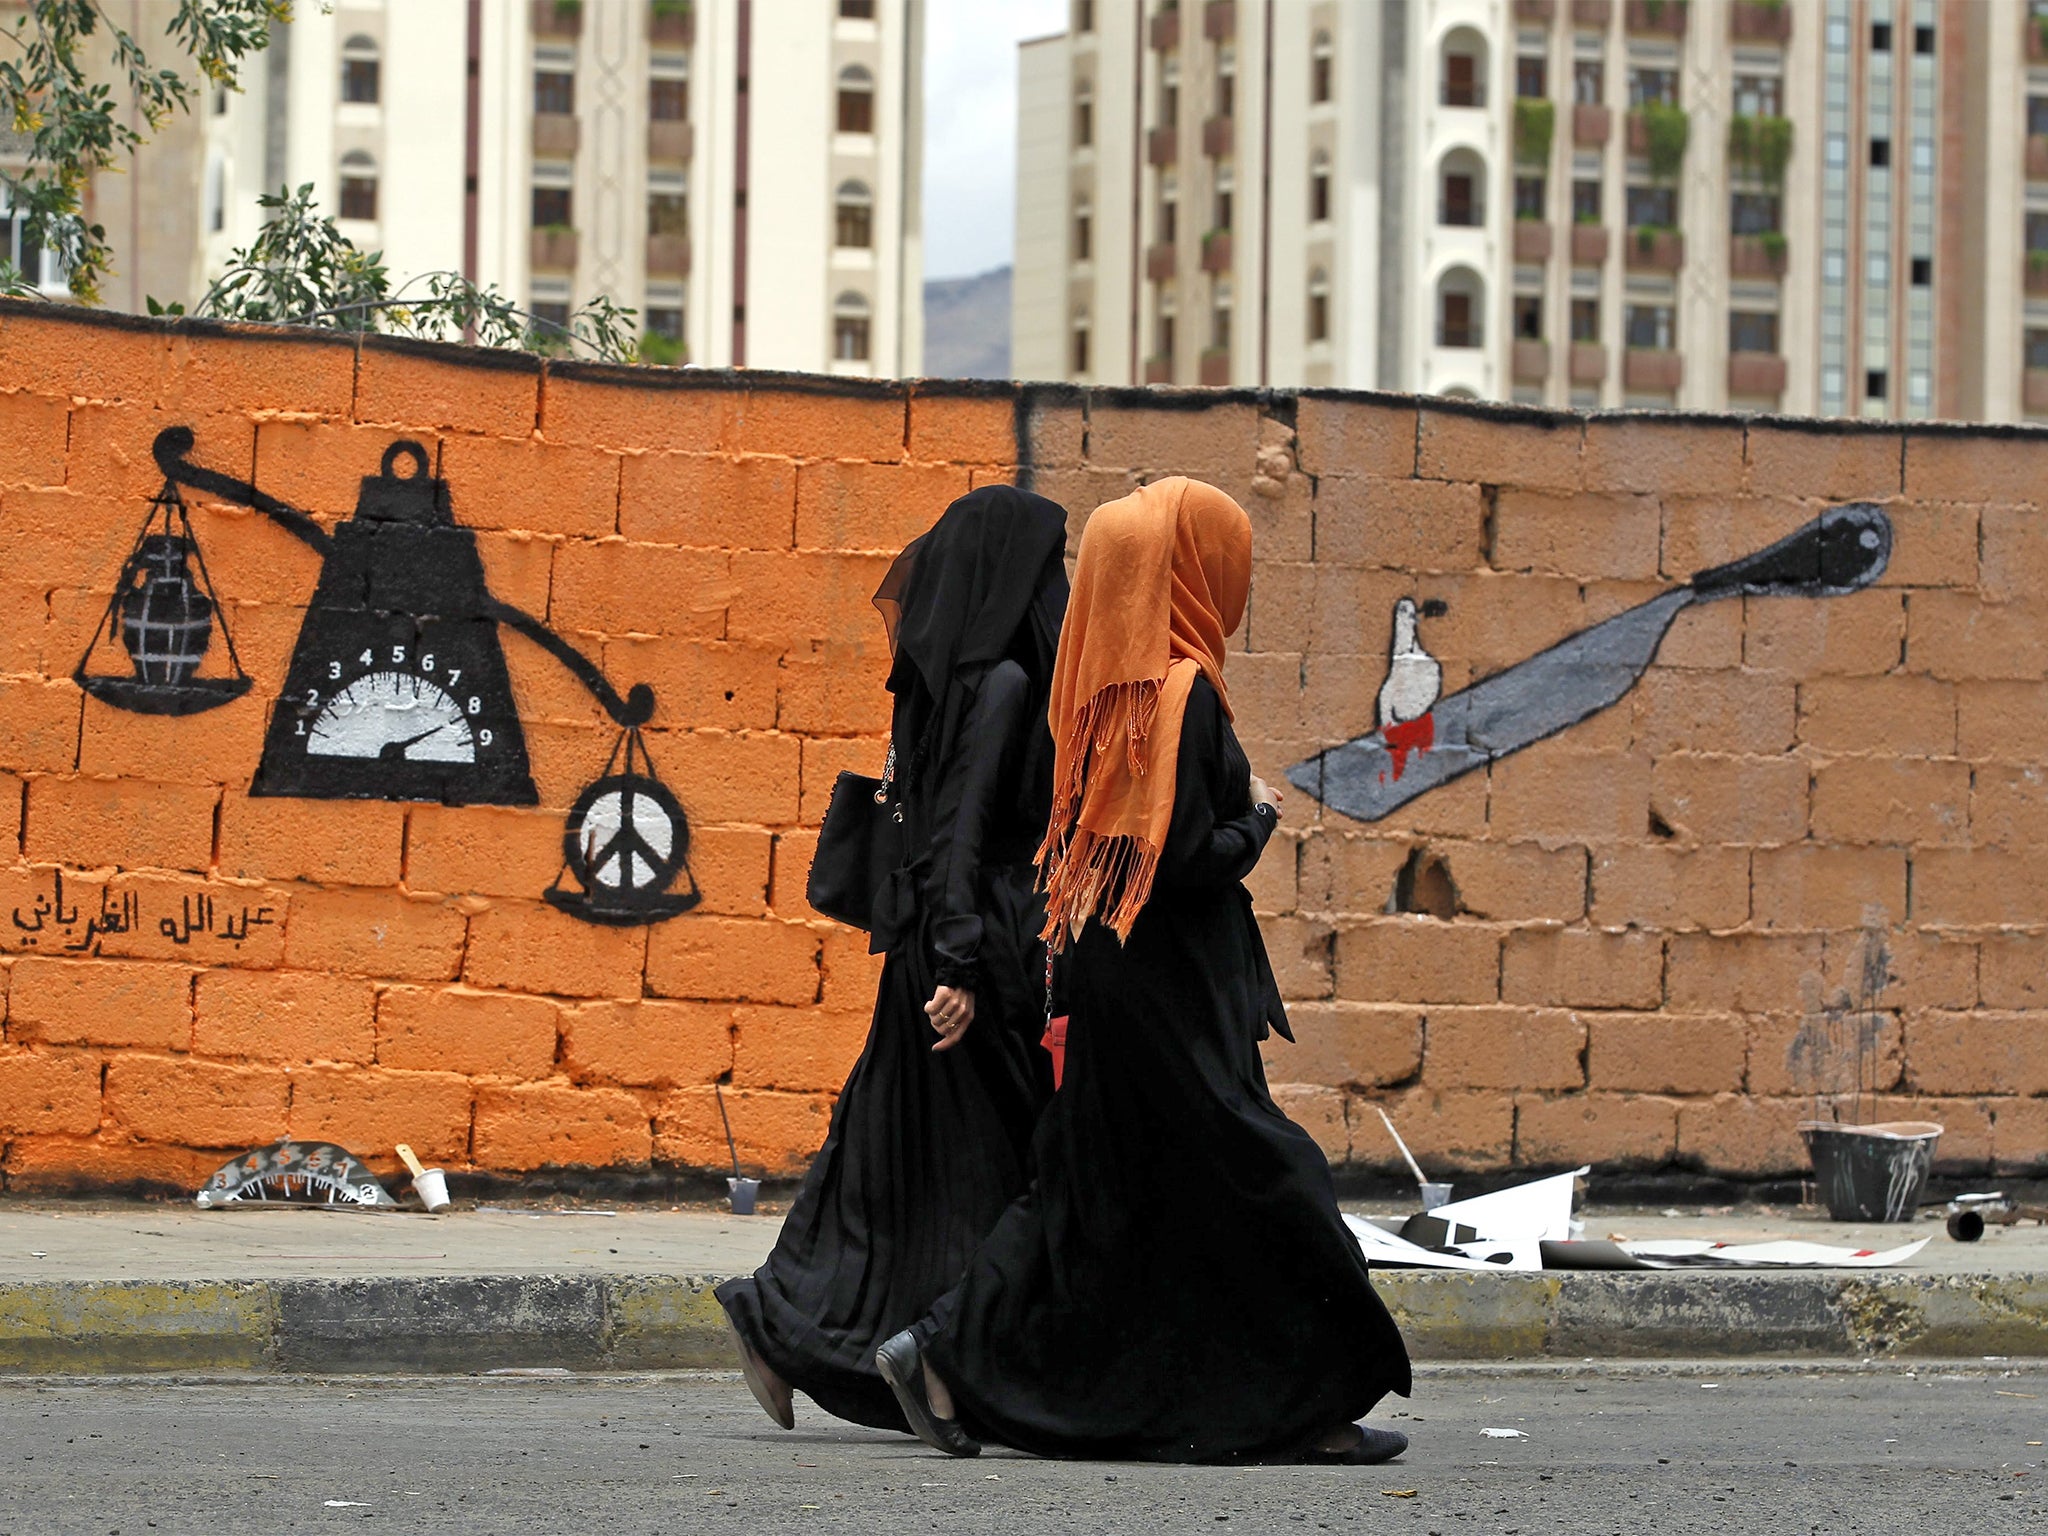 Yemeni women pass graffiti in support of peace in the war-affected country